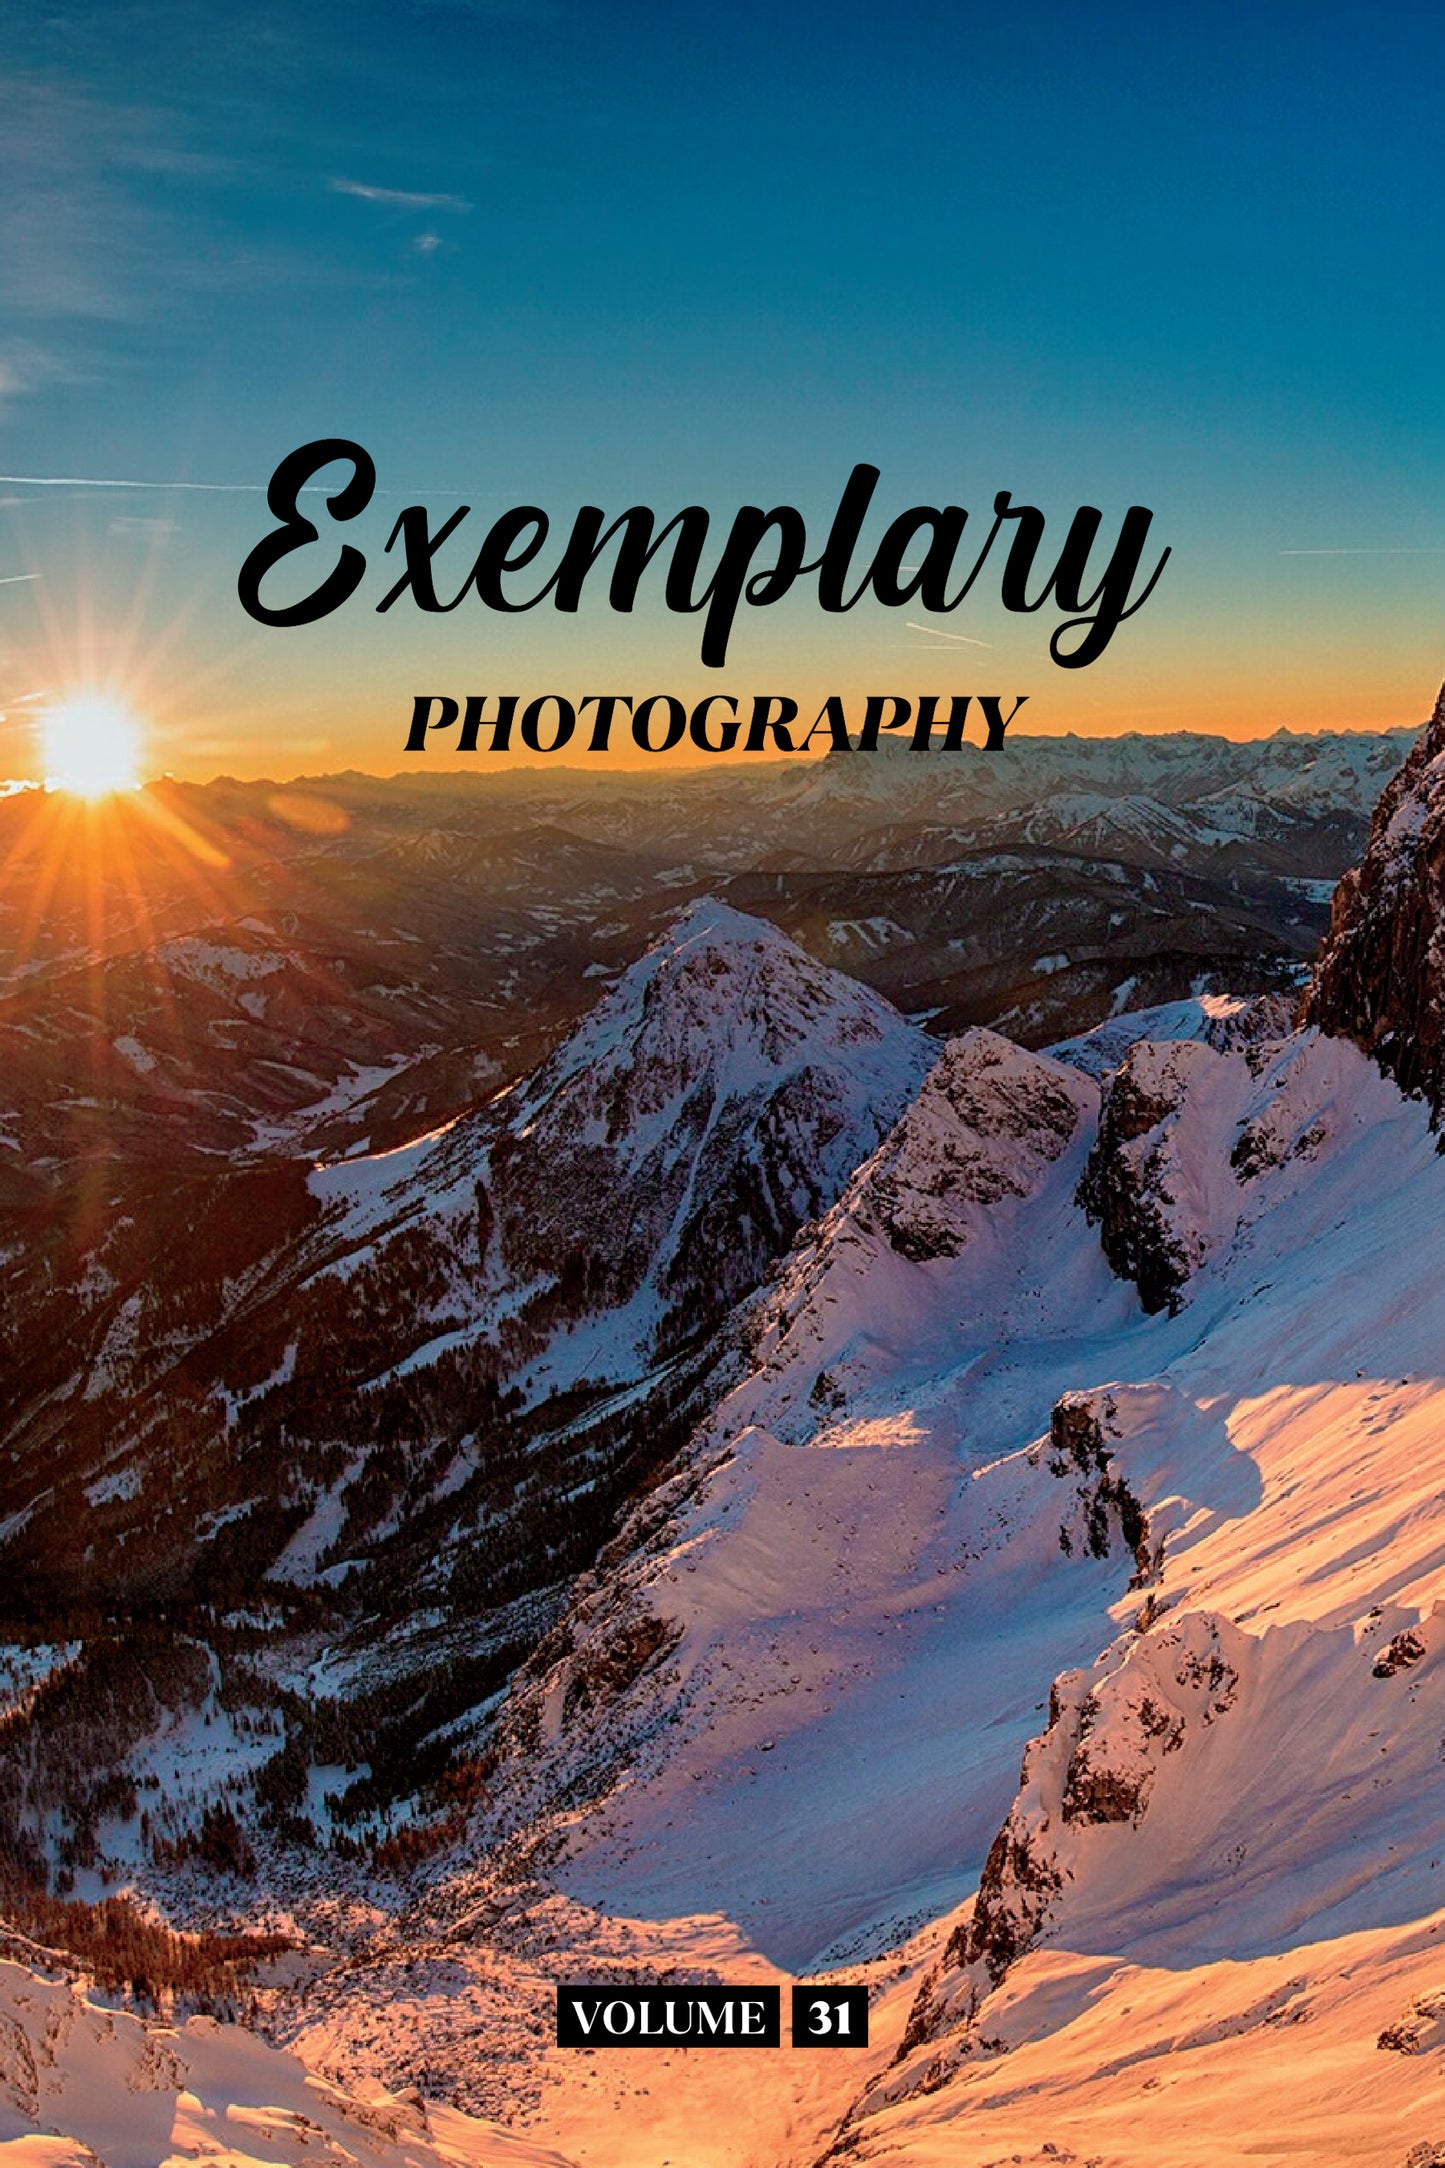 Exemplary Photography Volume 31 (Physical Book Pre-Order)